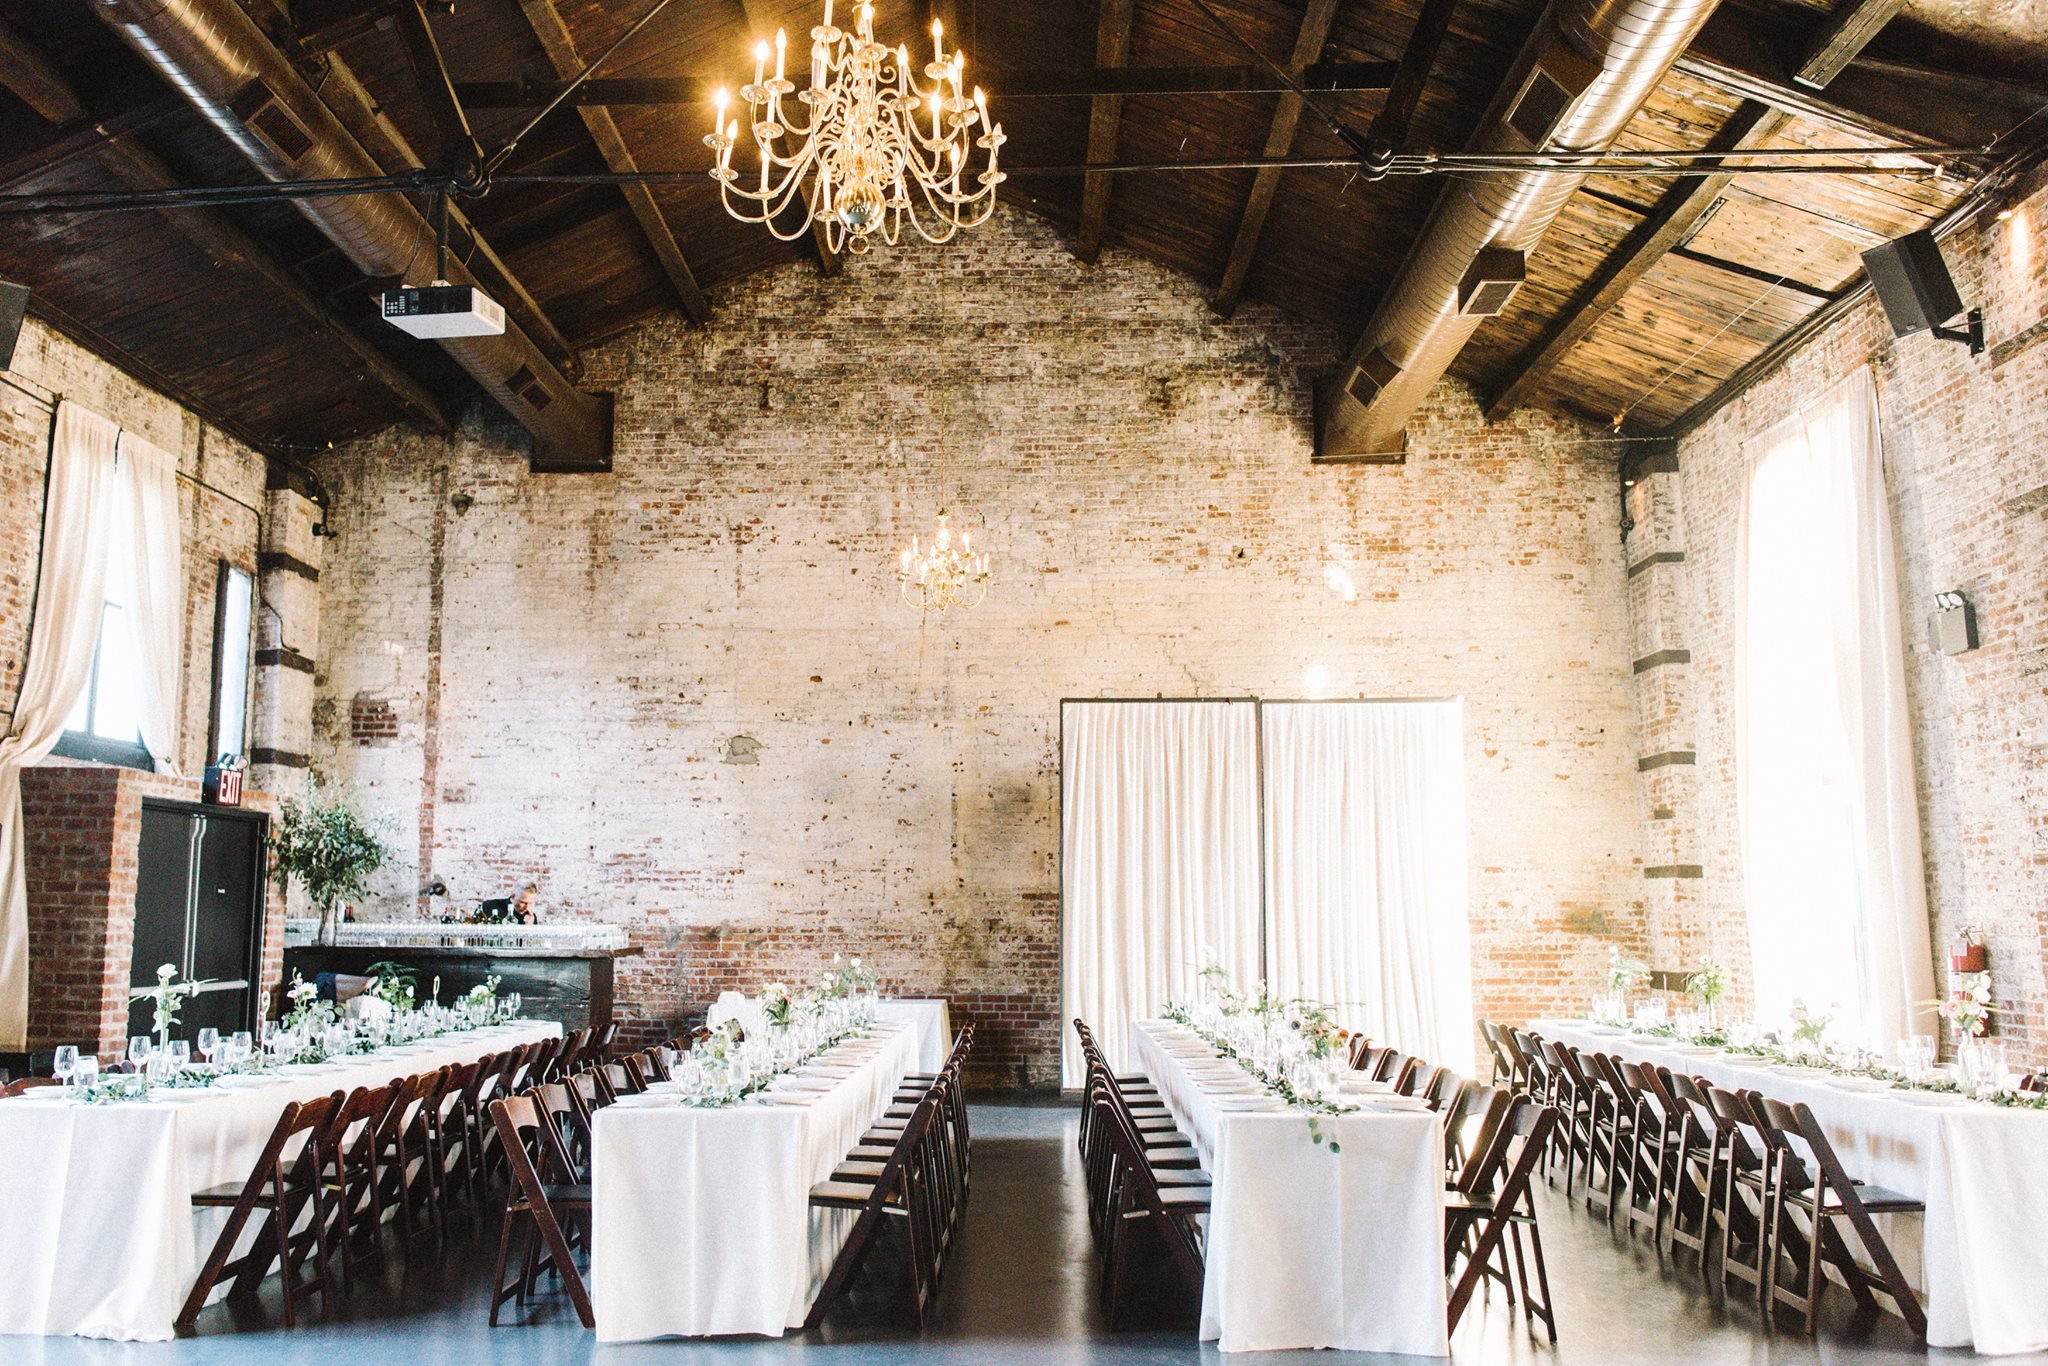 Bright wedding venue with long tables, white flowers, brick walls, and a crystal chandelier.